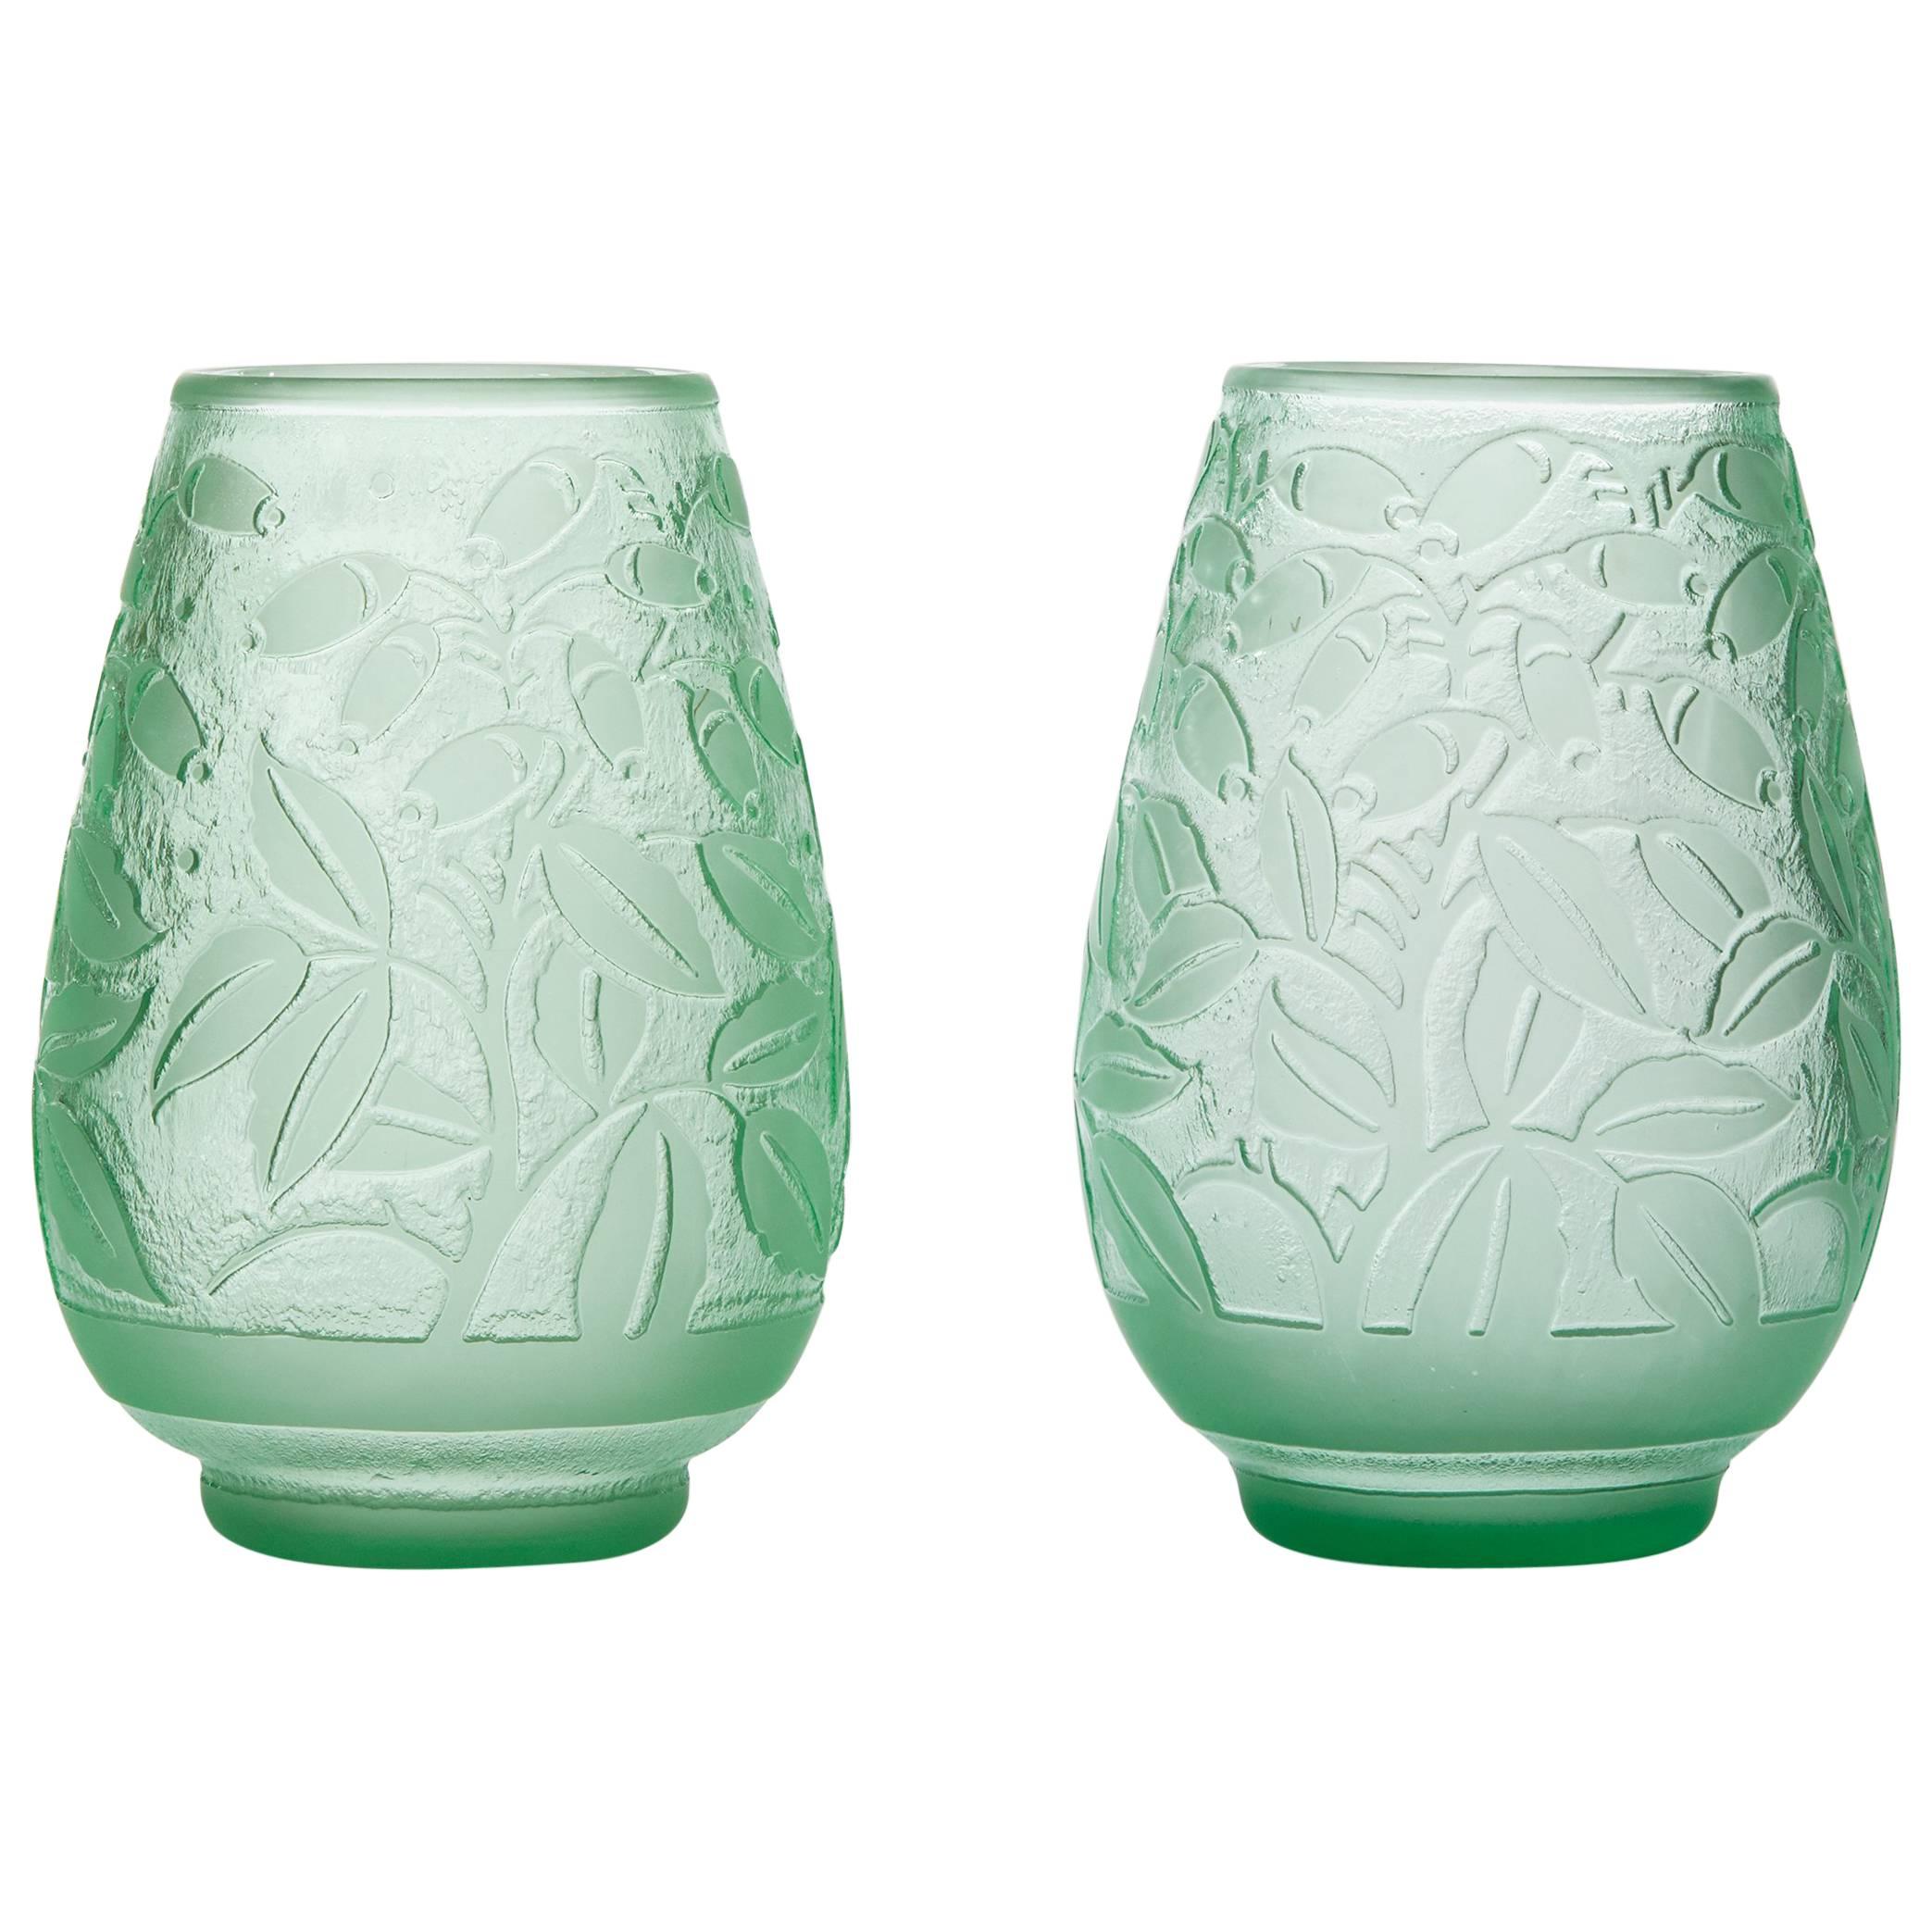 Daum, Incised Art Deco Glass Vases, France, Early 20th Century